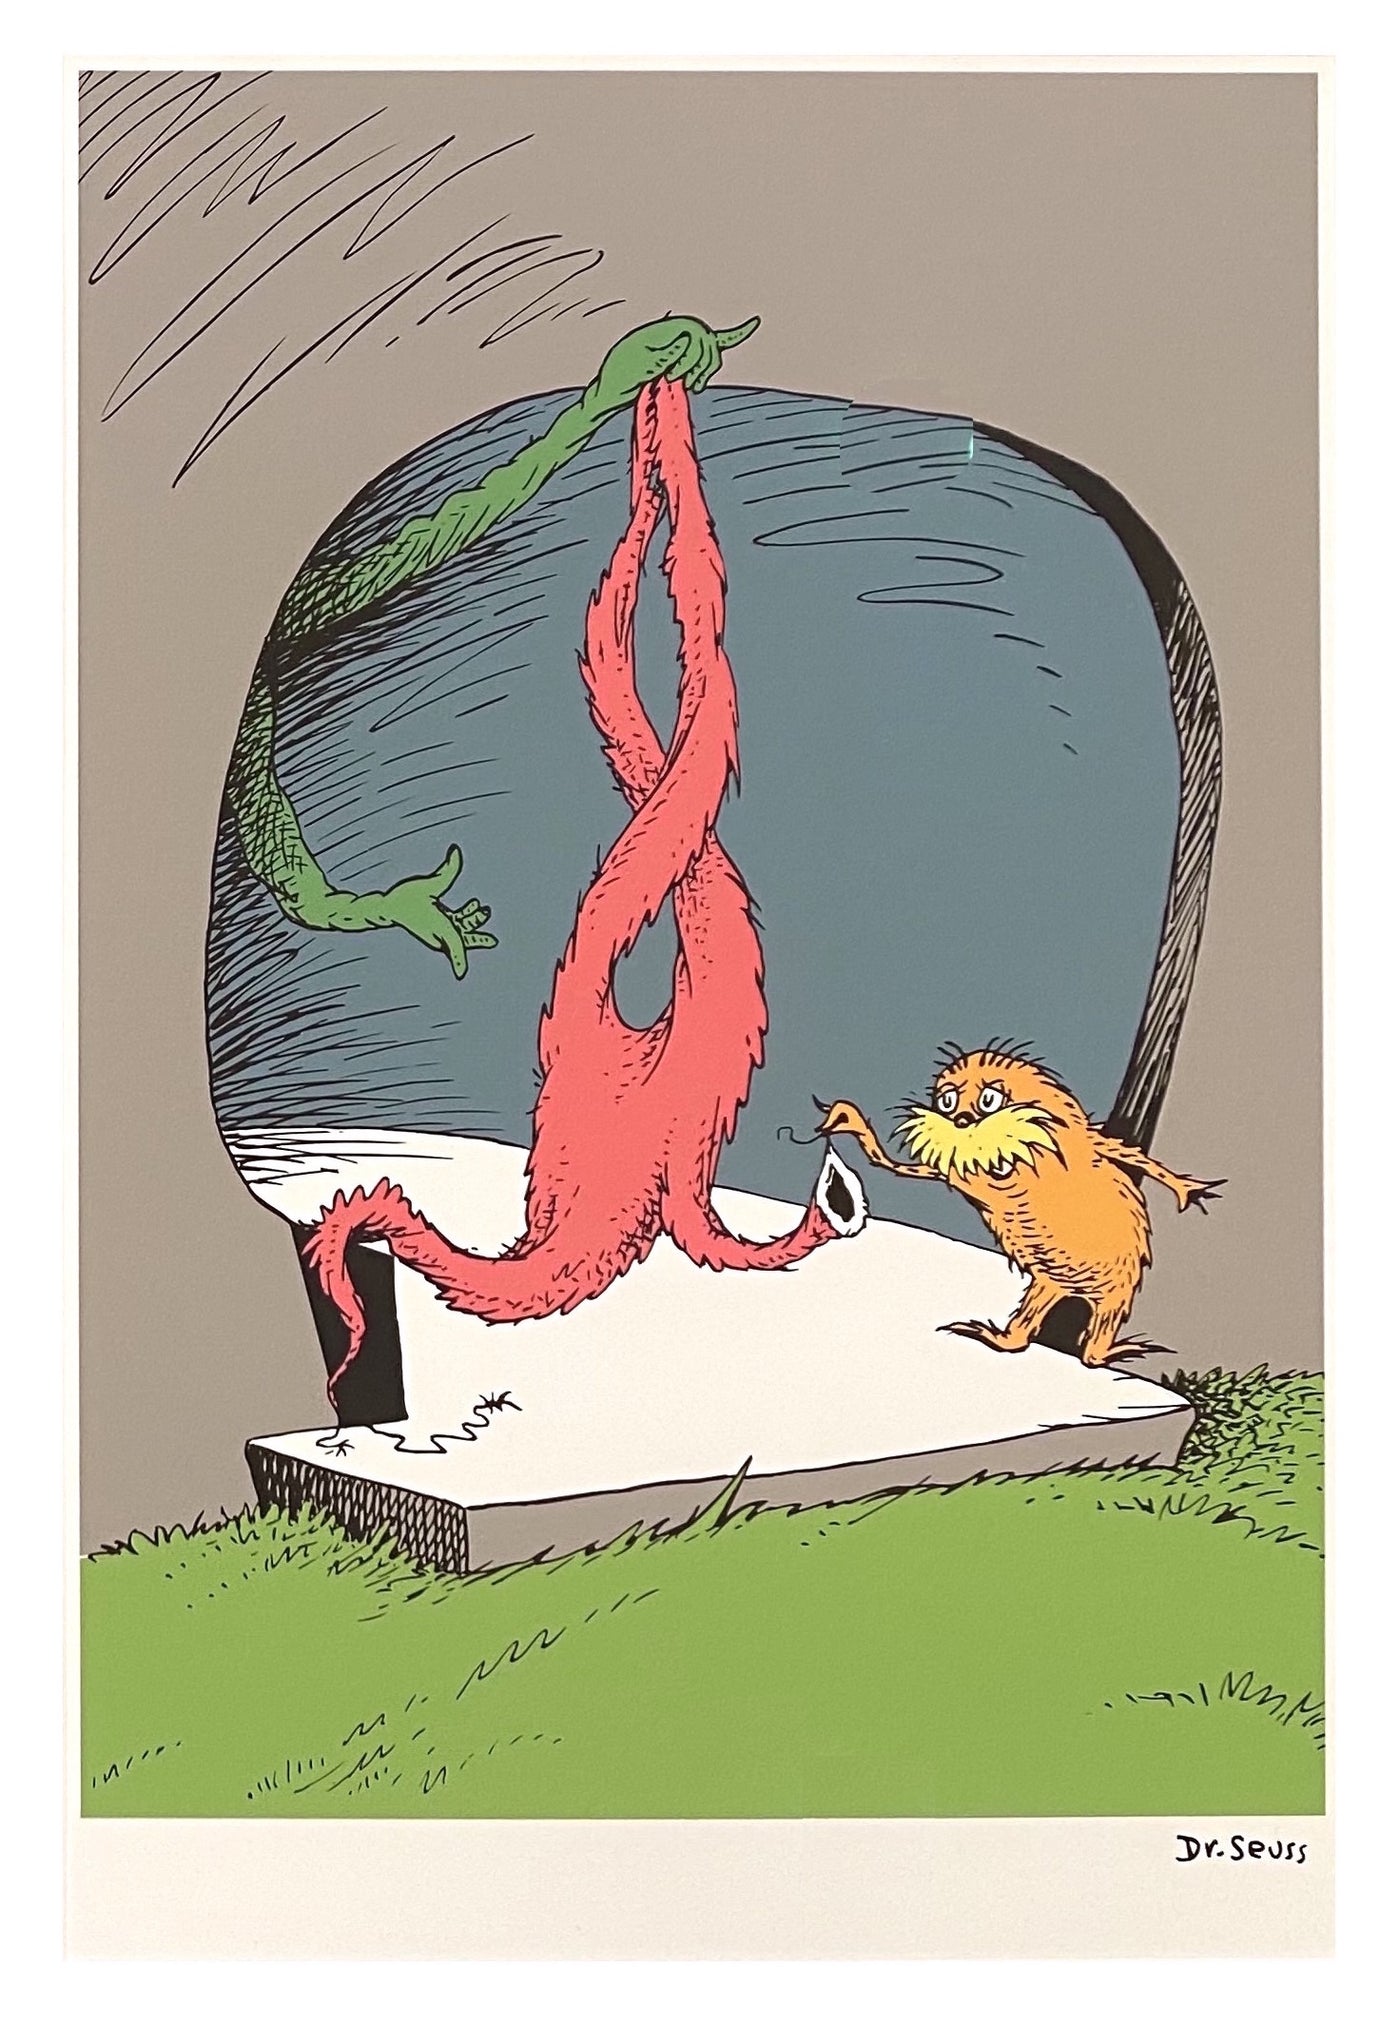 Dr. Seuss The Lorax Fine Art Pigment Print Reproduction, "A Thneed's A Fine Something That All People Need! Diptych"